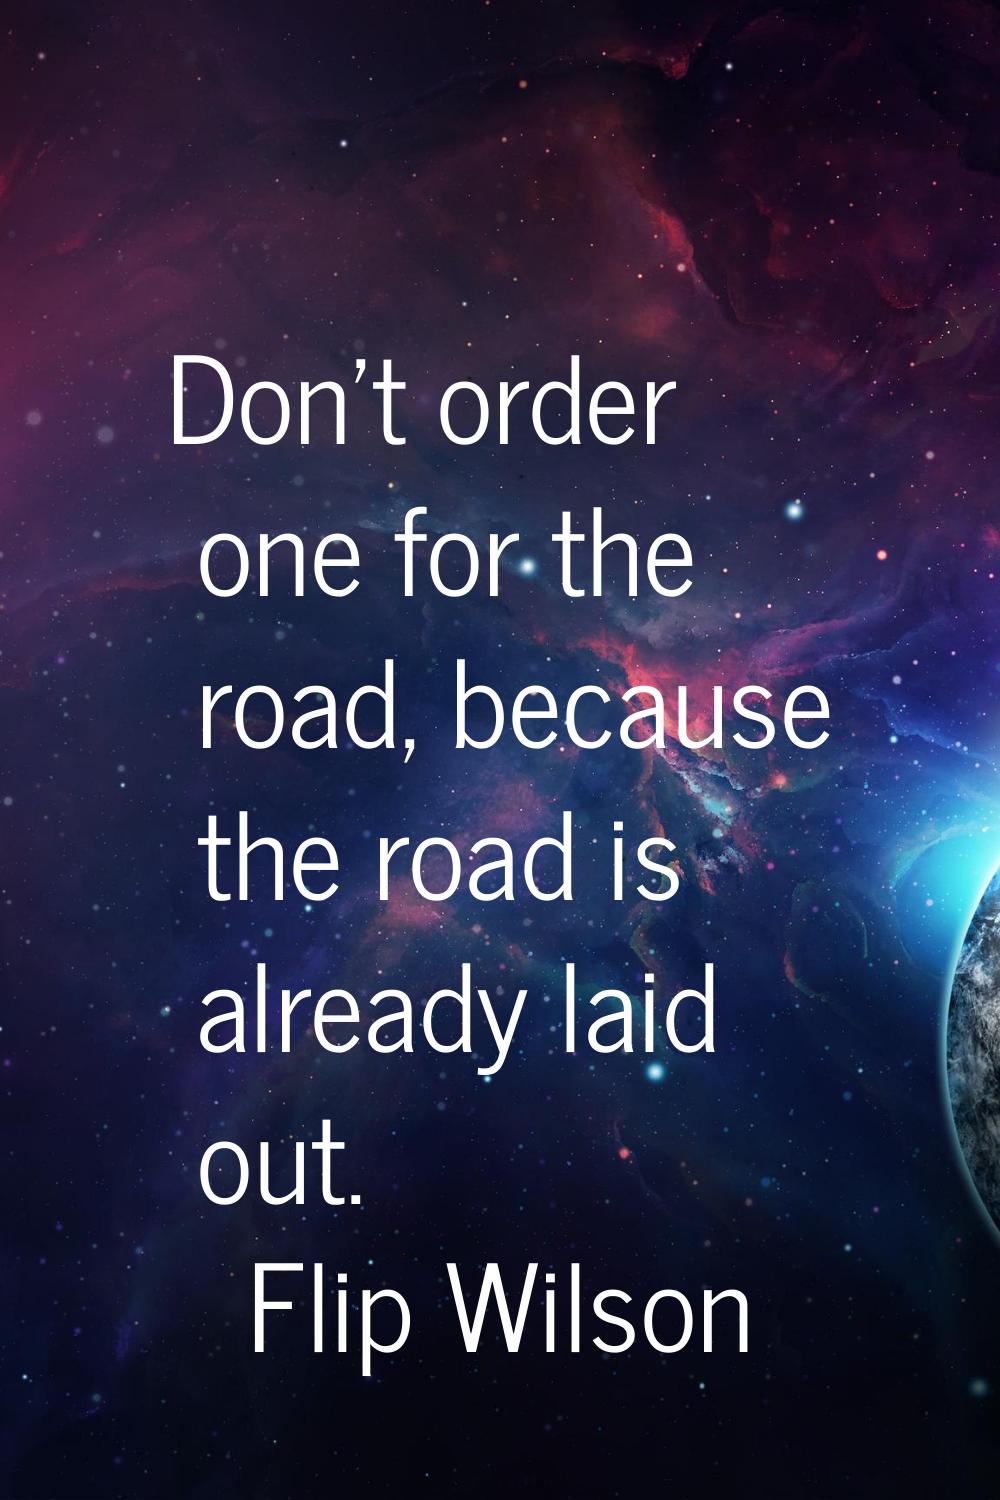 Don't order one for the road, because the road is already laid out.